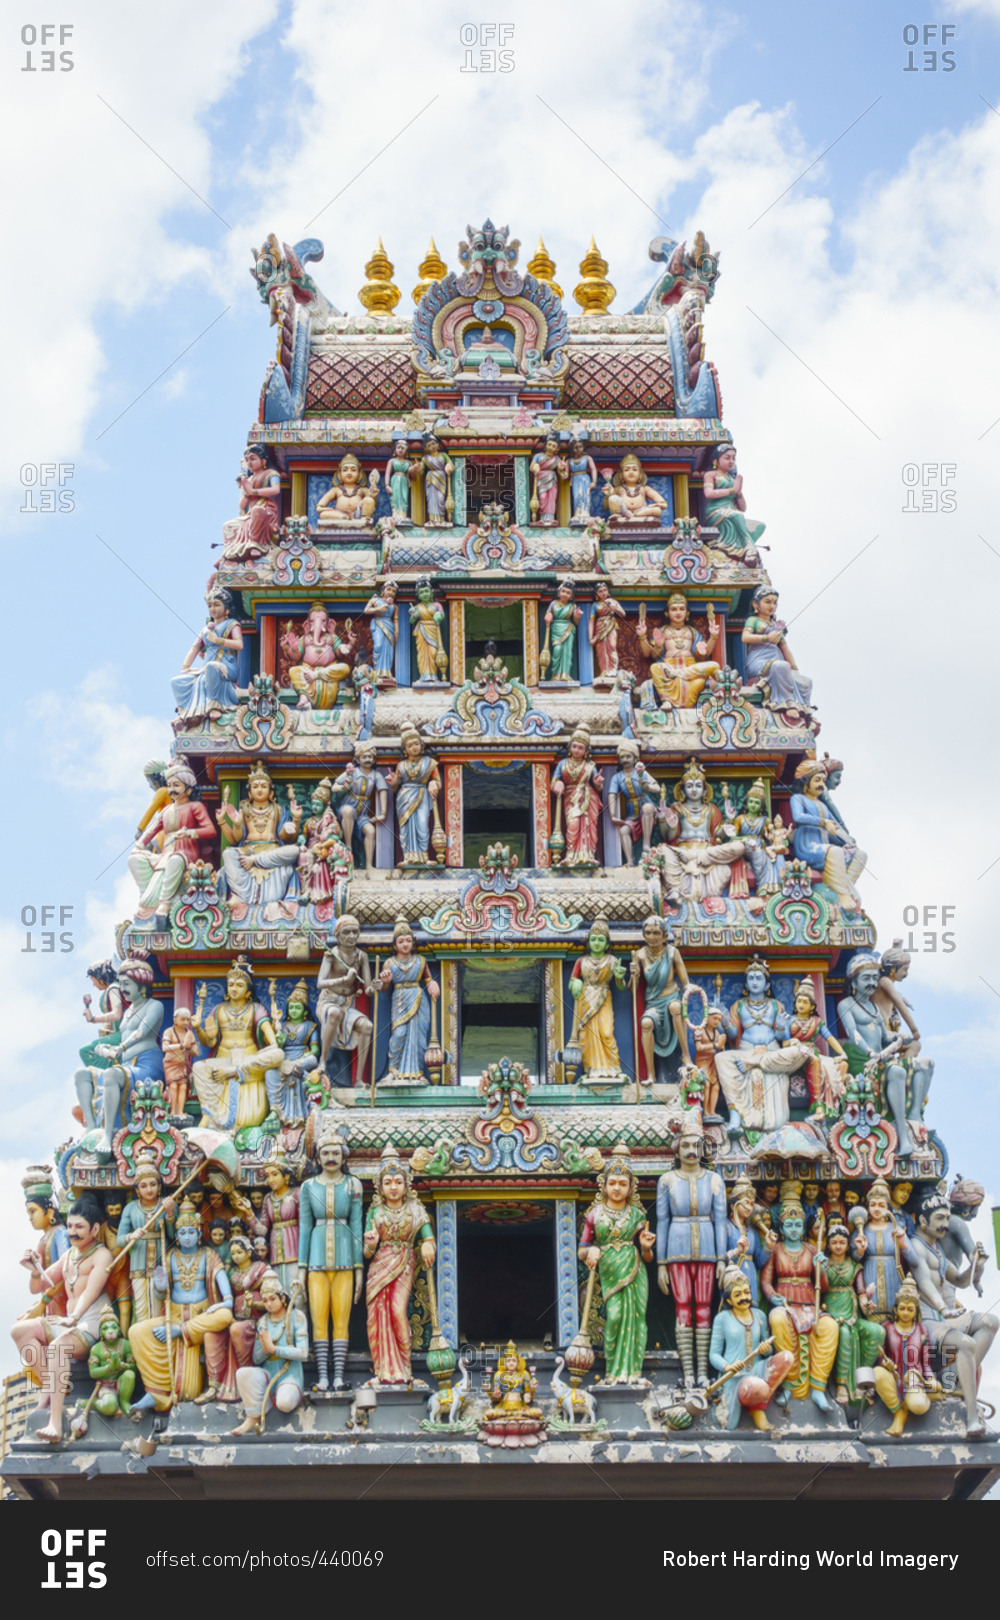 Sri Mariamman Temple in Chinatown, the oldest Hindu temple in Singapore with its colorfully decorated gopuram (tower), Singapore, Southeast Asia, Asia